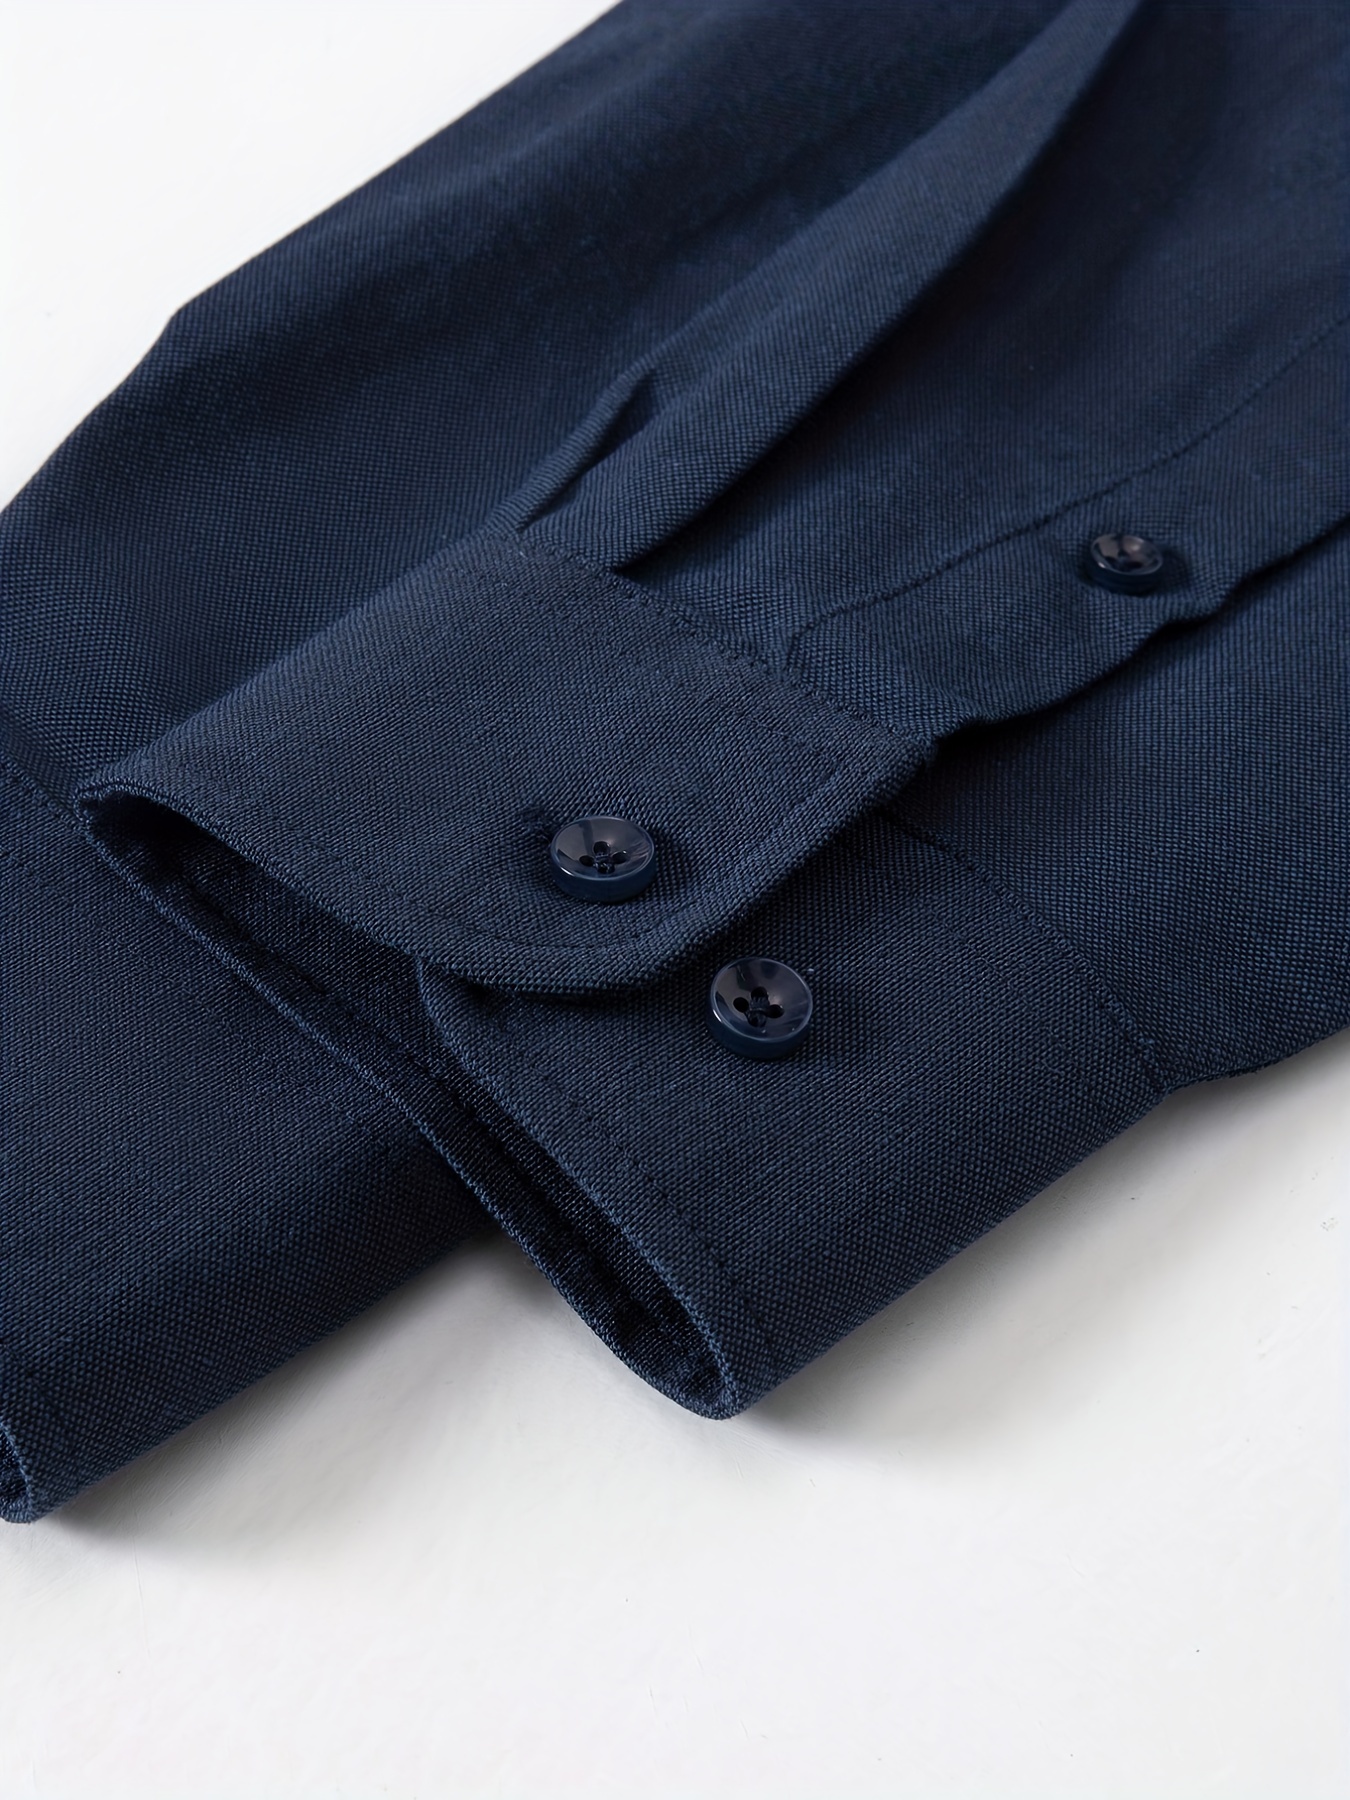 Men's Solid Brushed Cotton Shirt in Navy - Thursday